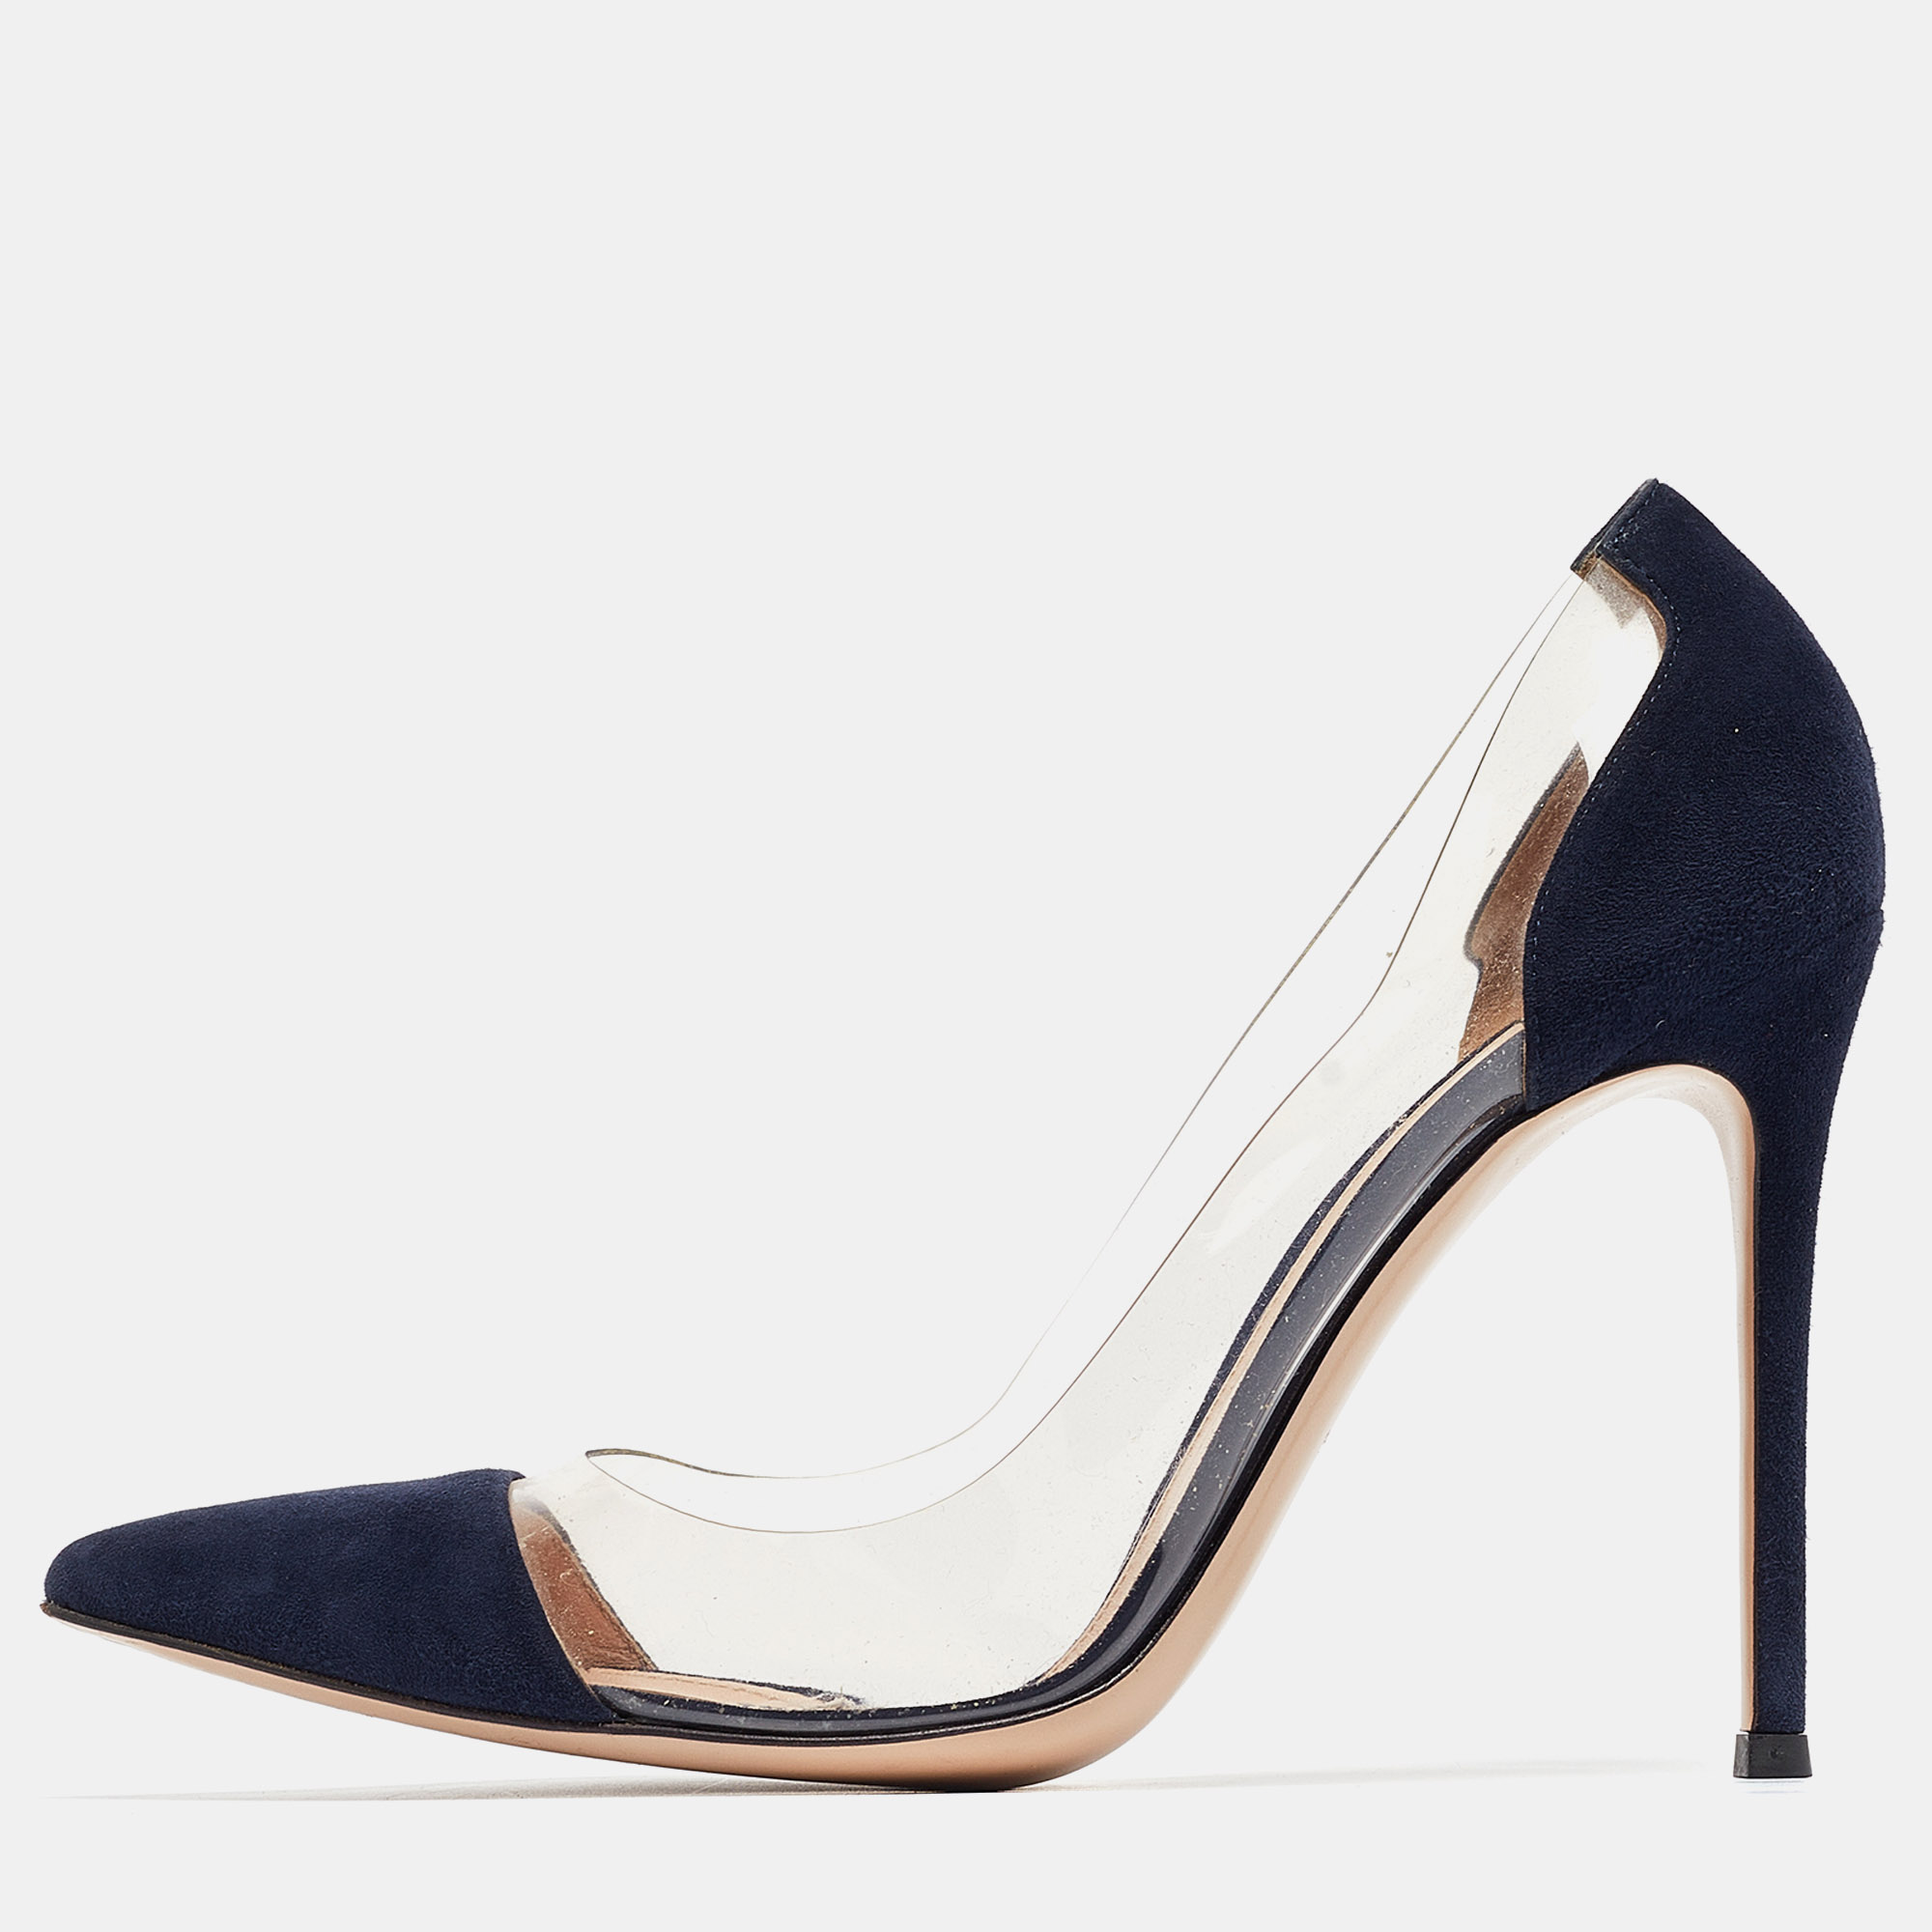 Gianvito rossi navy blue pvc and suede plexi pumps size 39